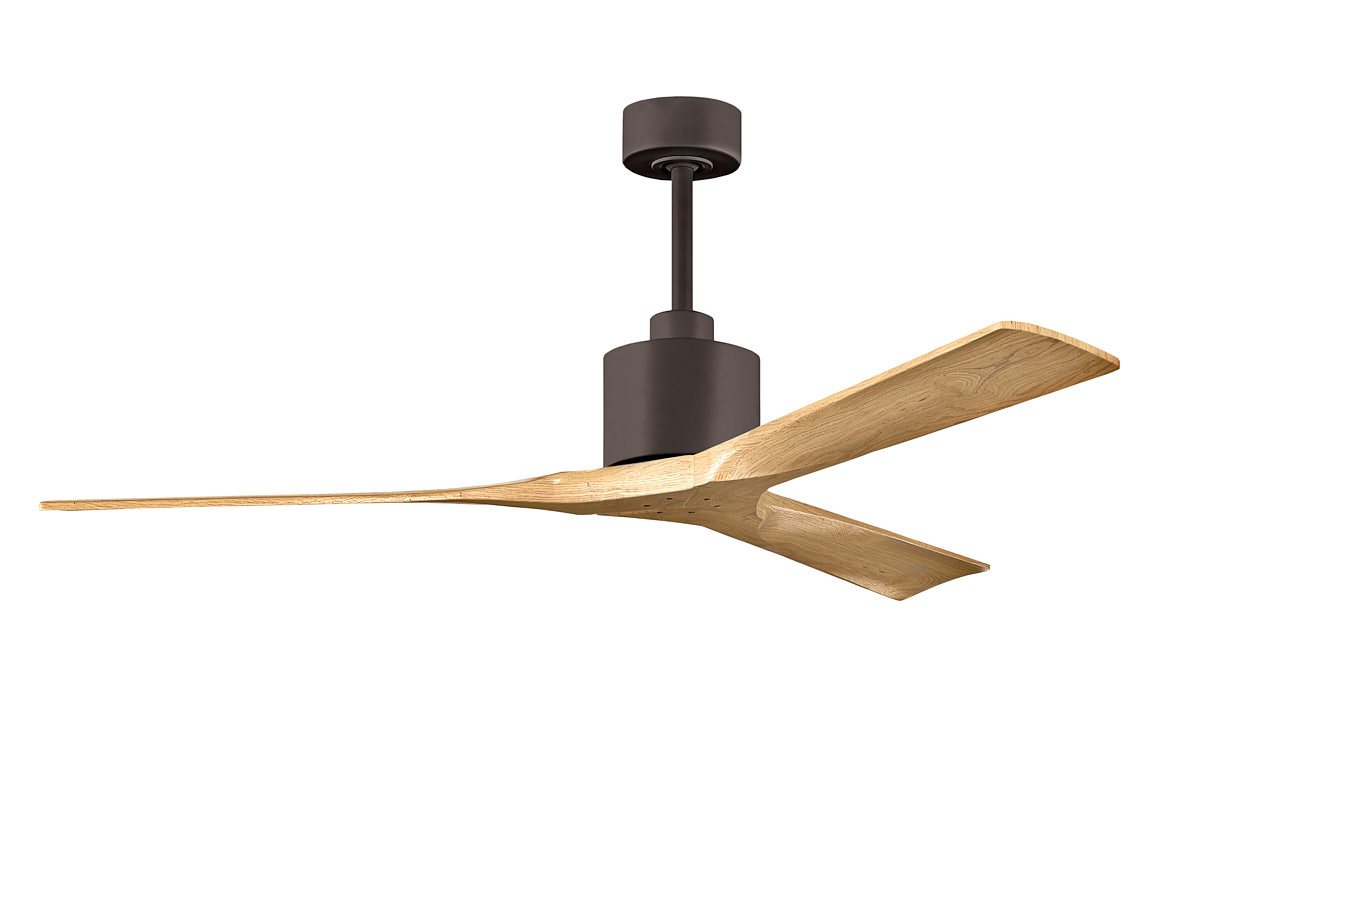 Nan ceiling fan in Textured Bronze Finish with 60